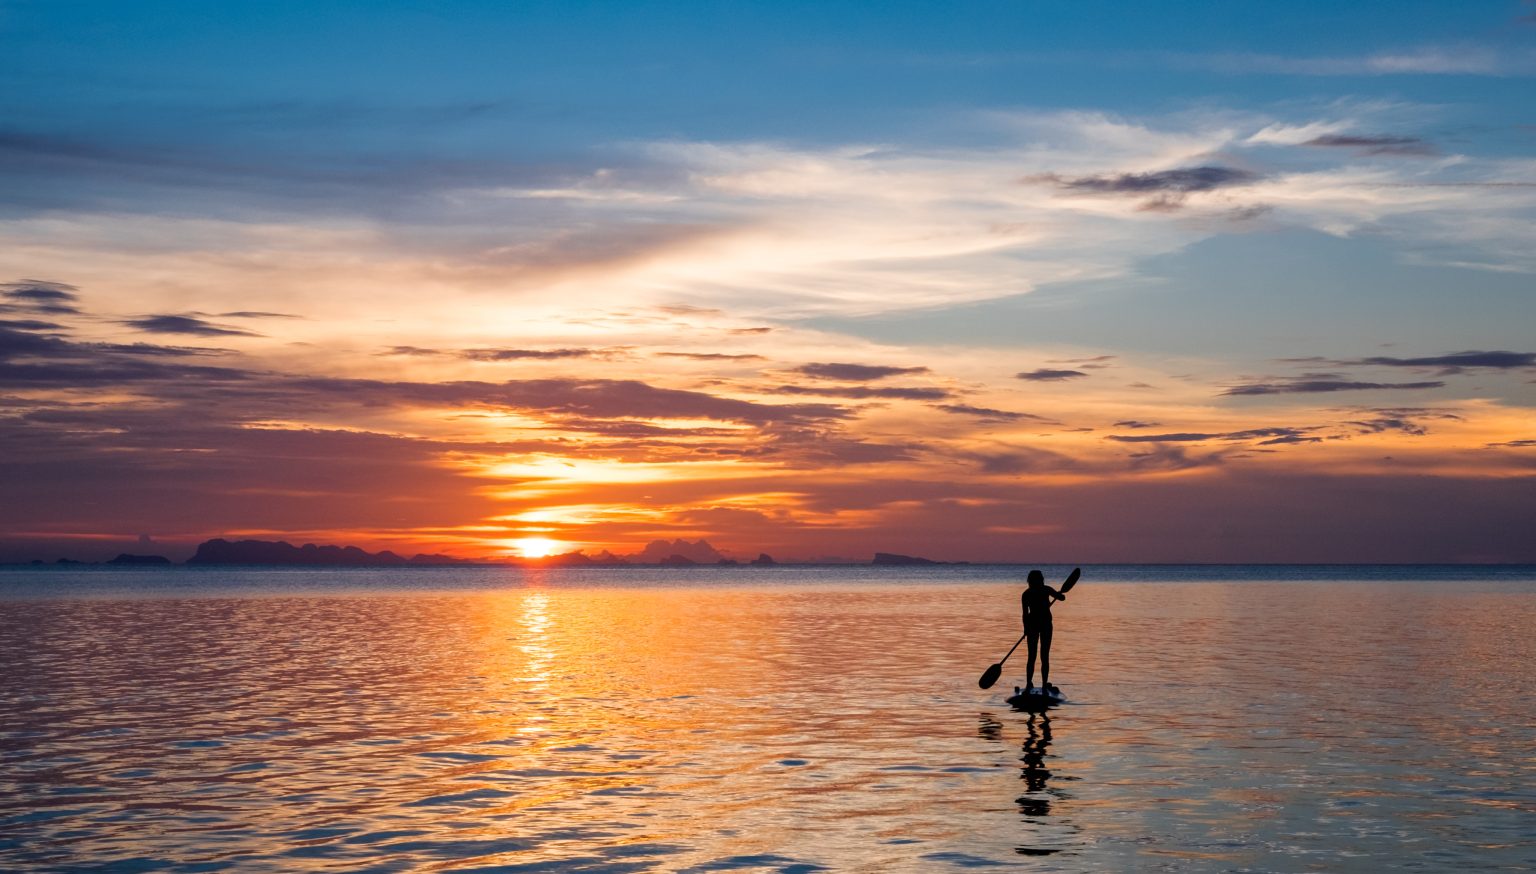 Girl on a stand up paddleboard with sunset and tropical island in the distance.